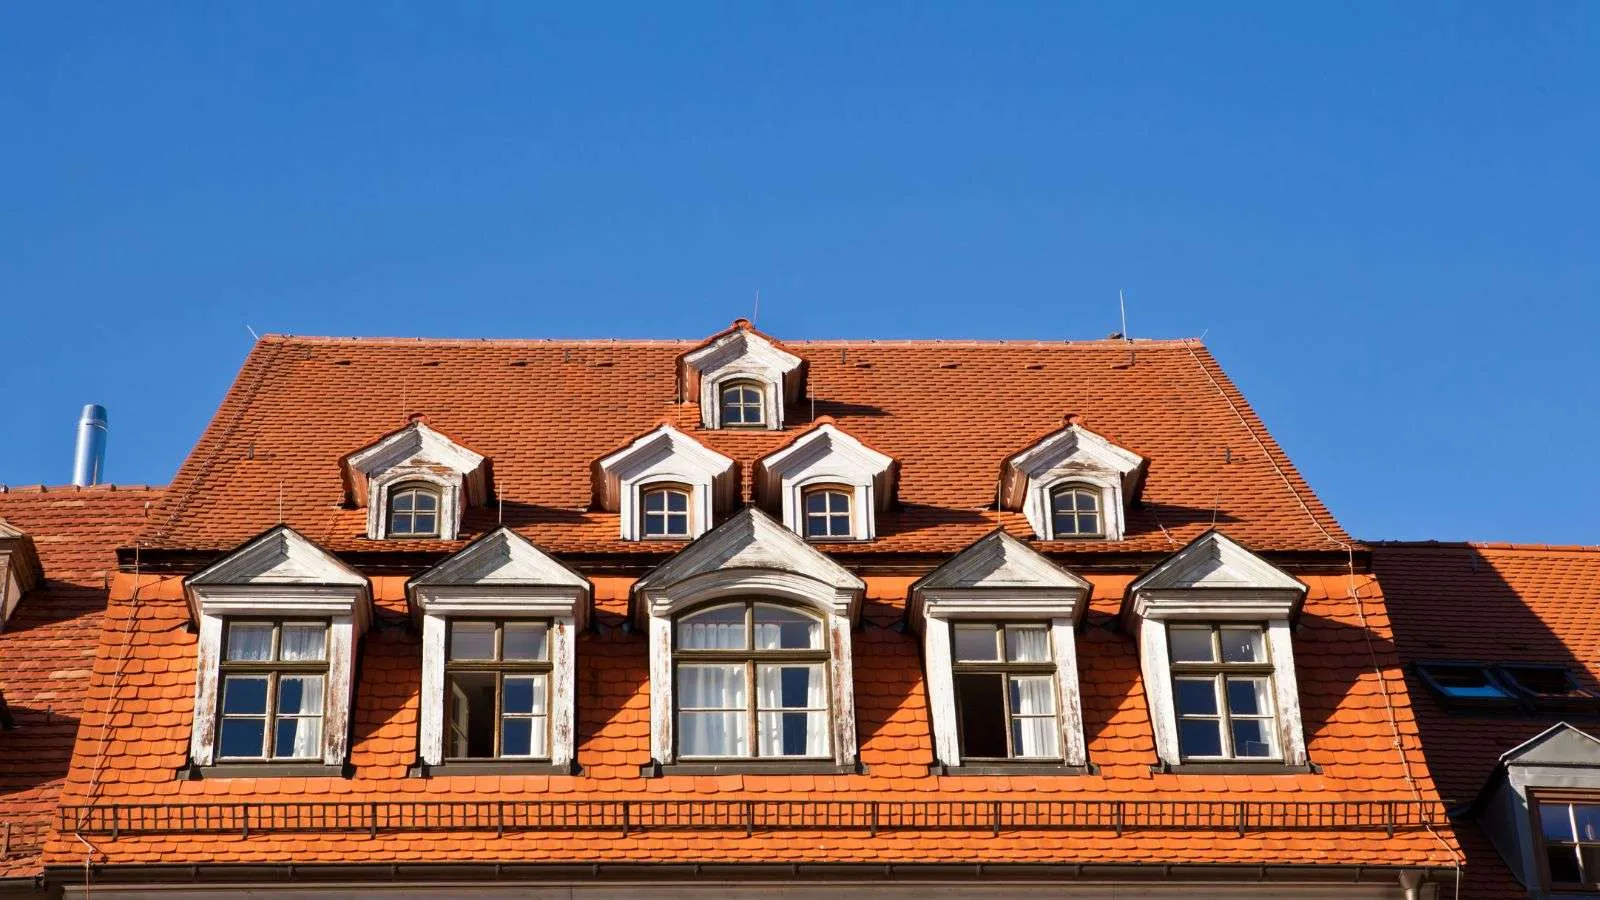 can roof dormers hurt roofs - bighomeprojects.com